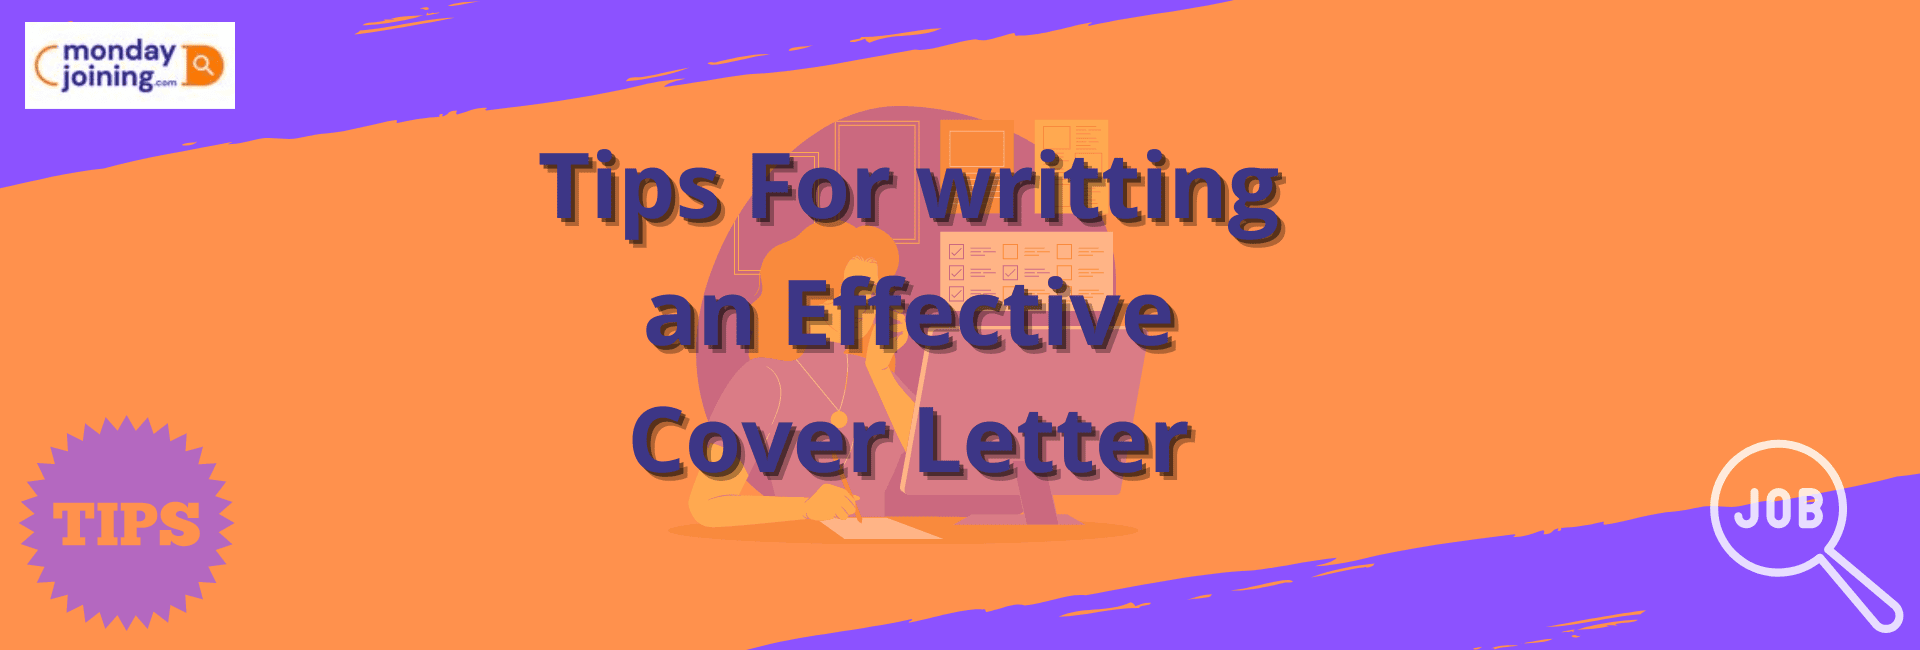 10 Tips for Writing an Effective Cover Letter